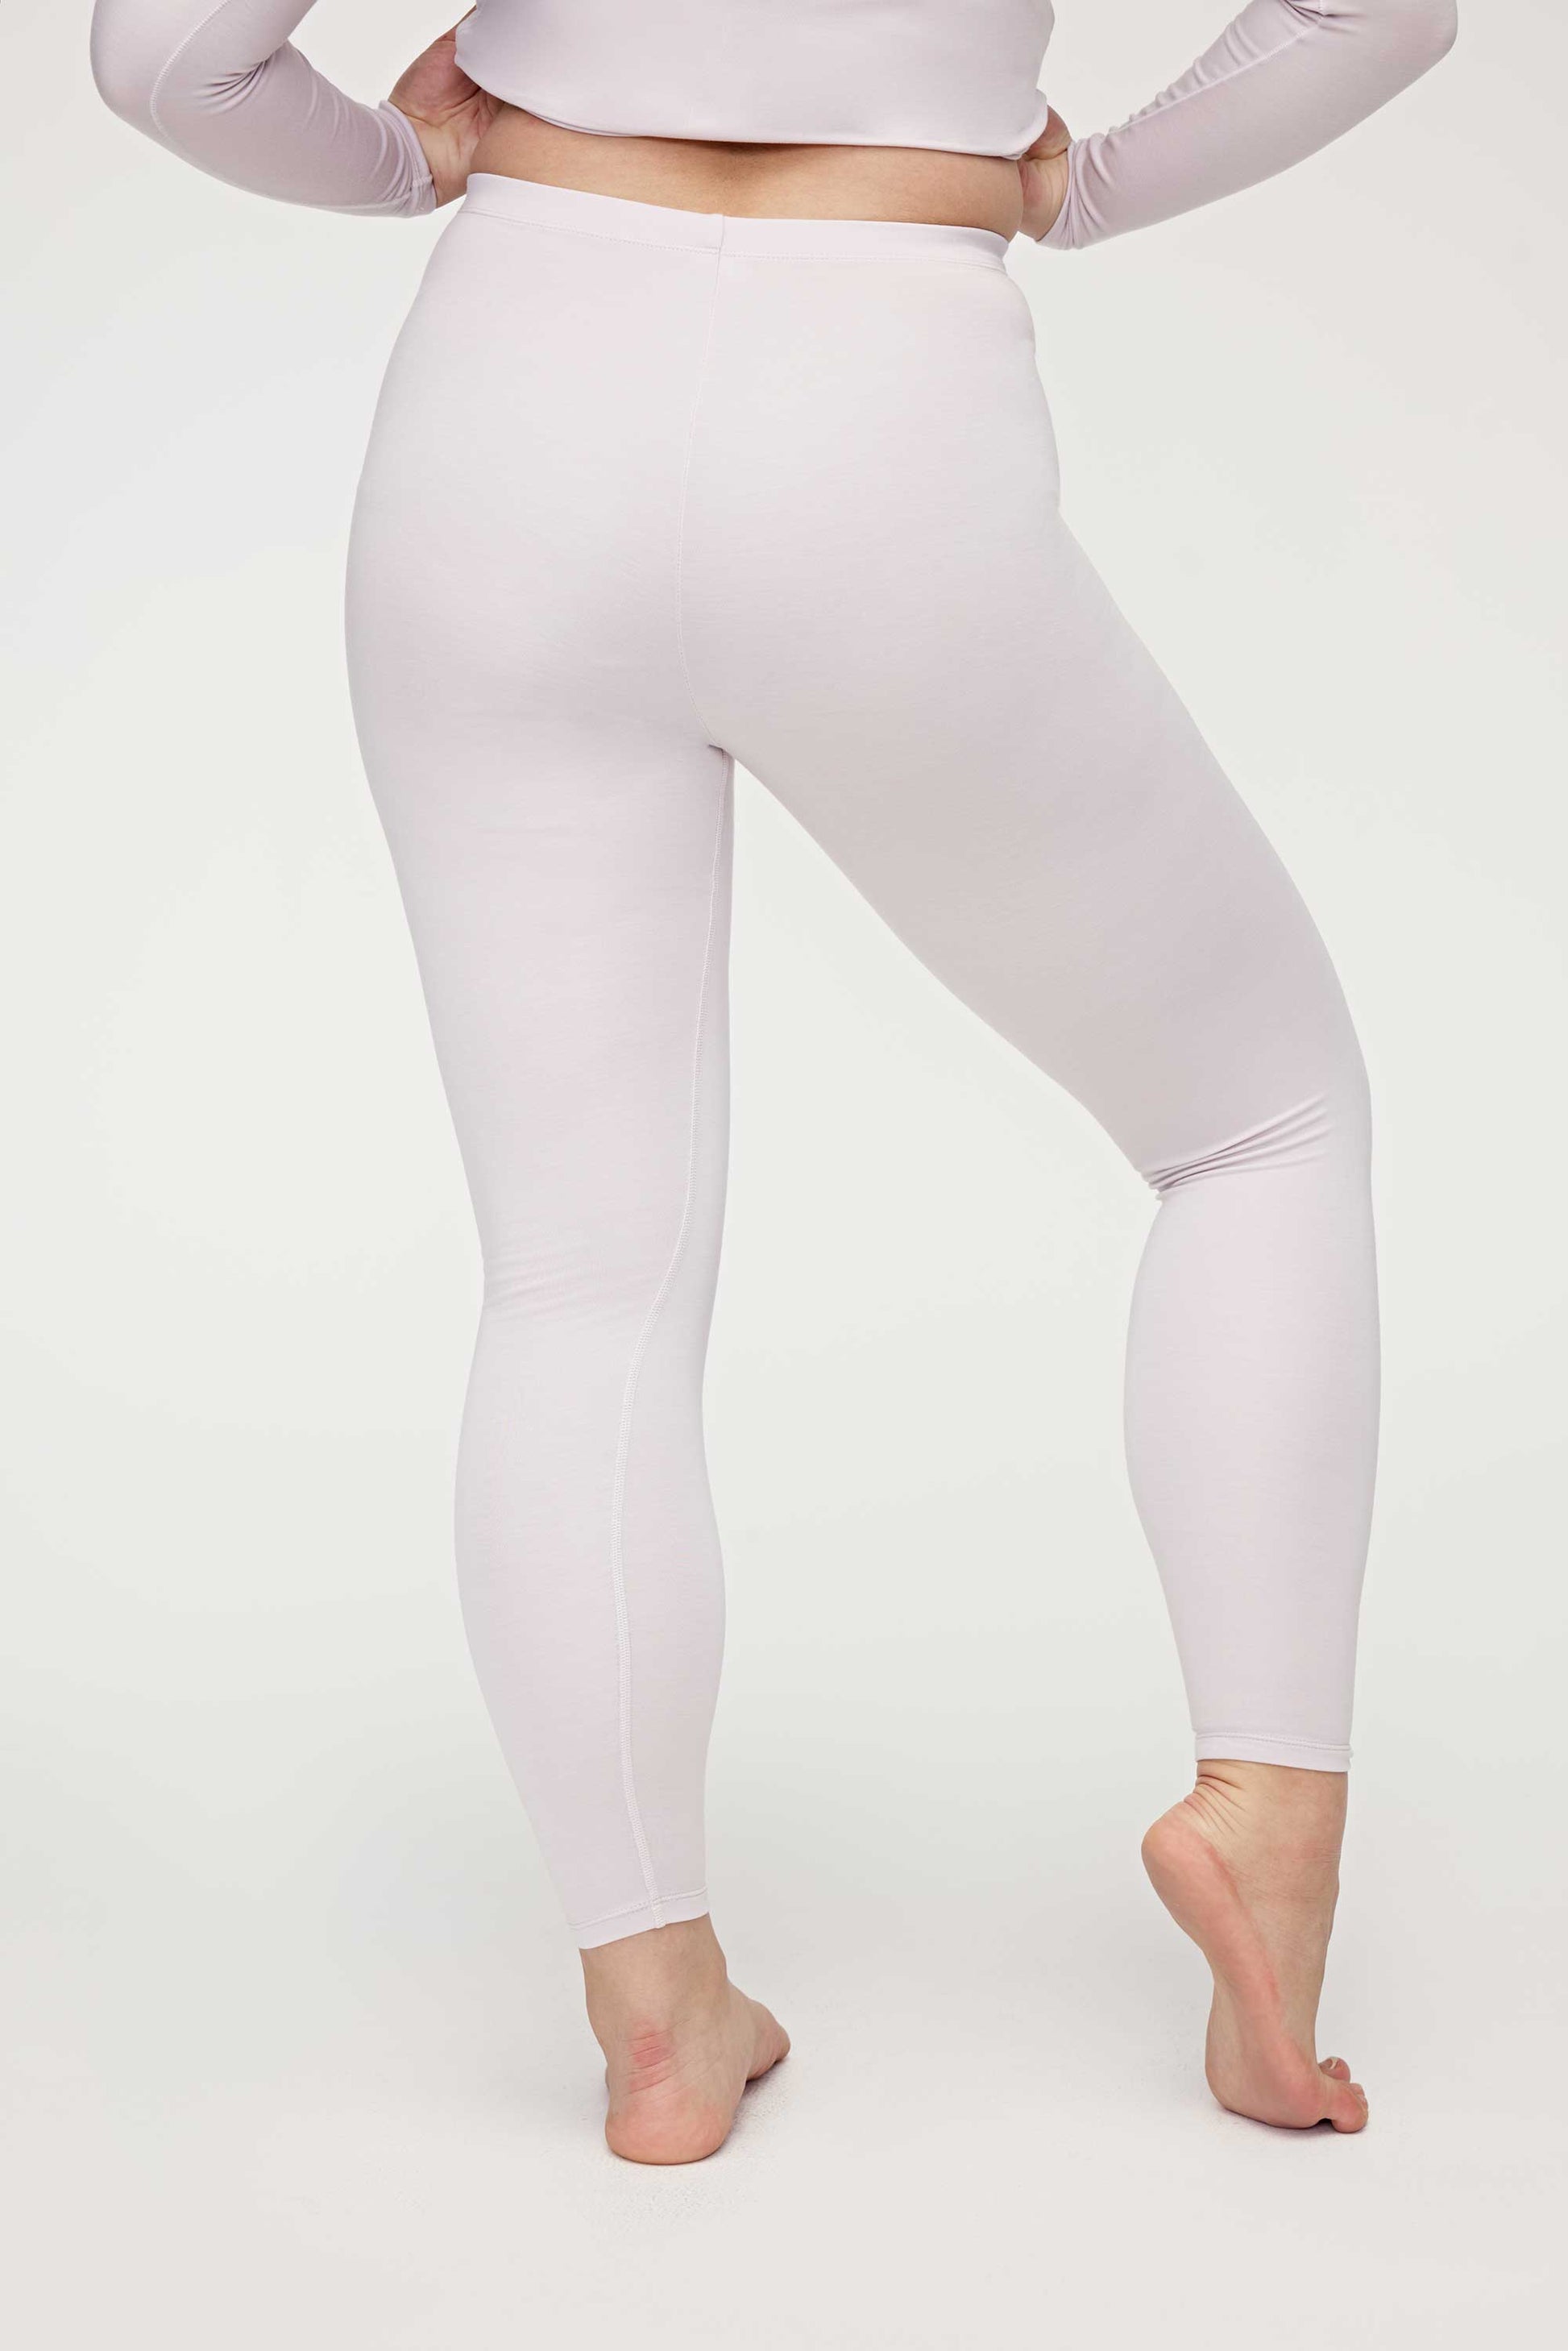 back of woman in light pink thermal pants